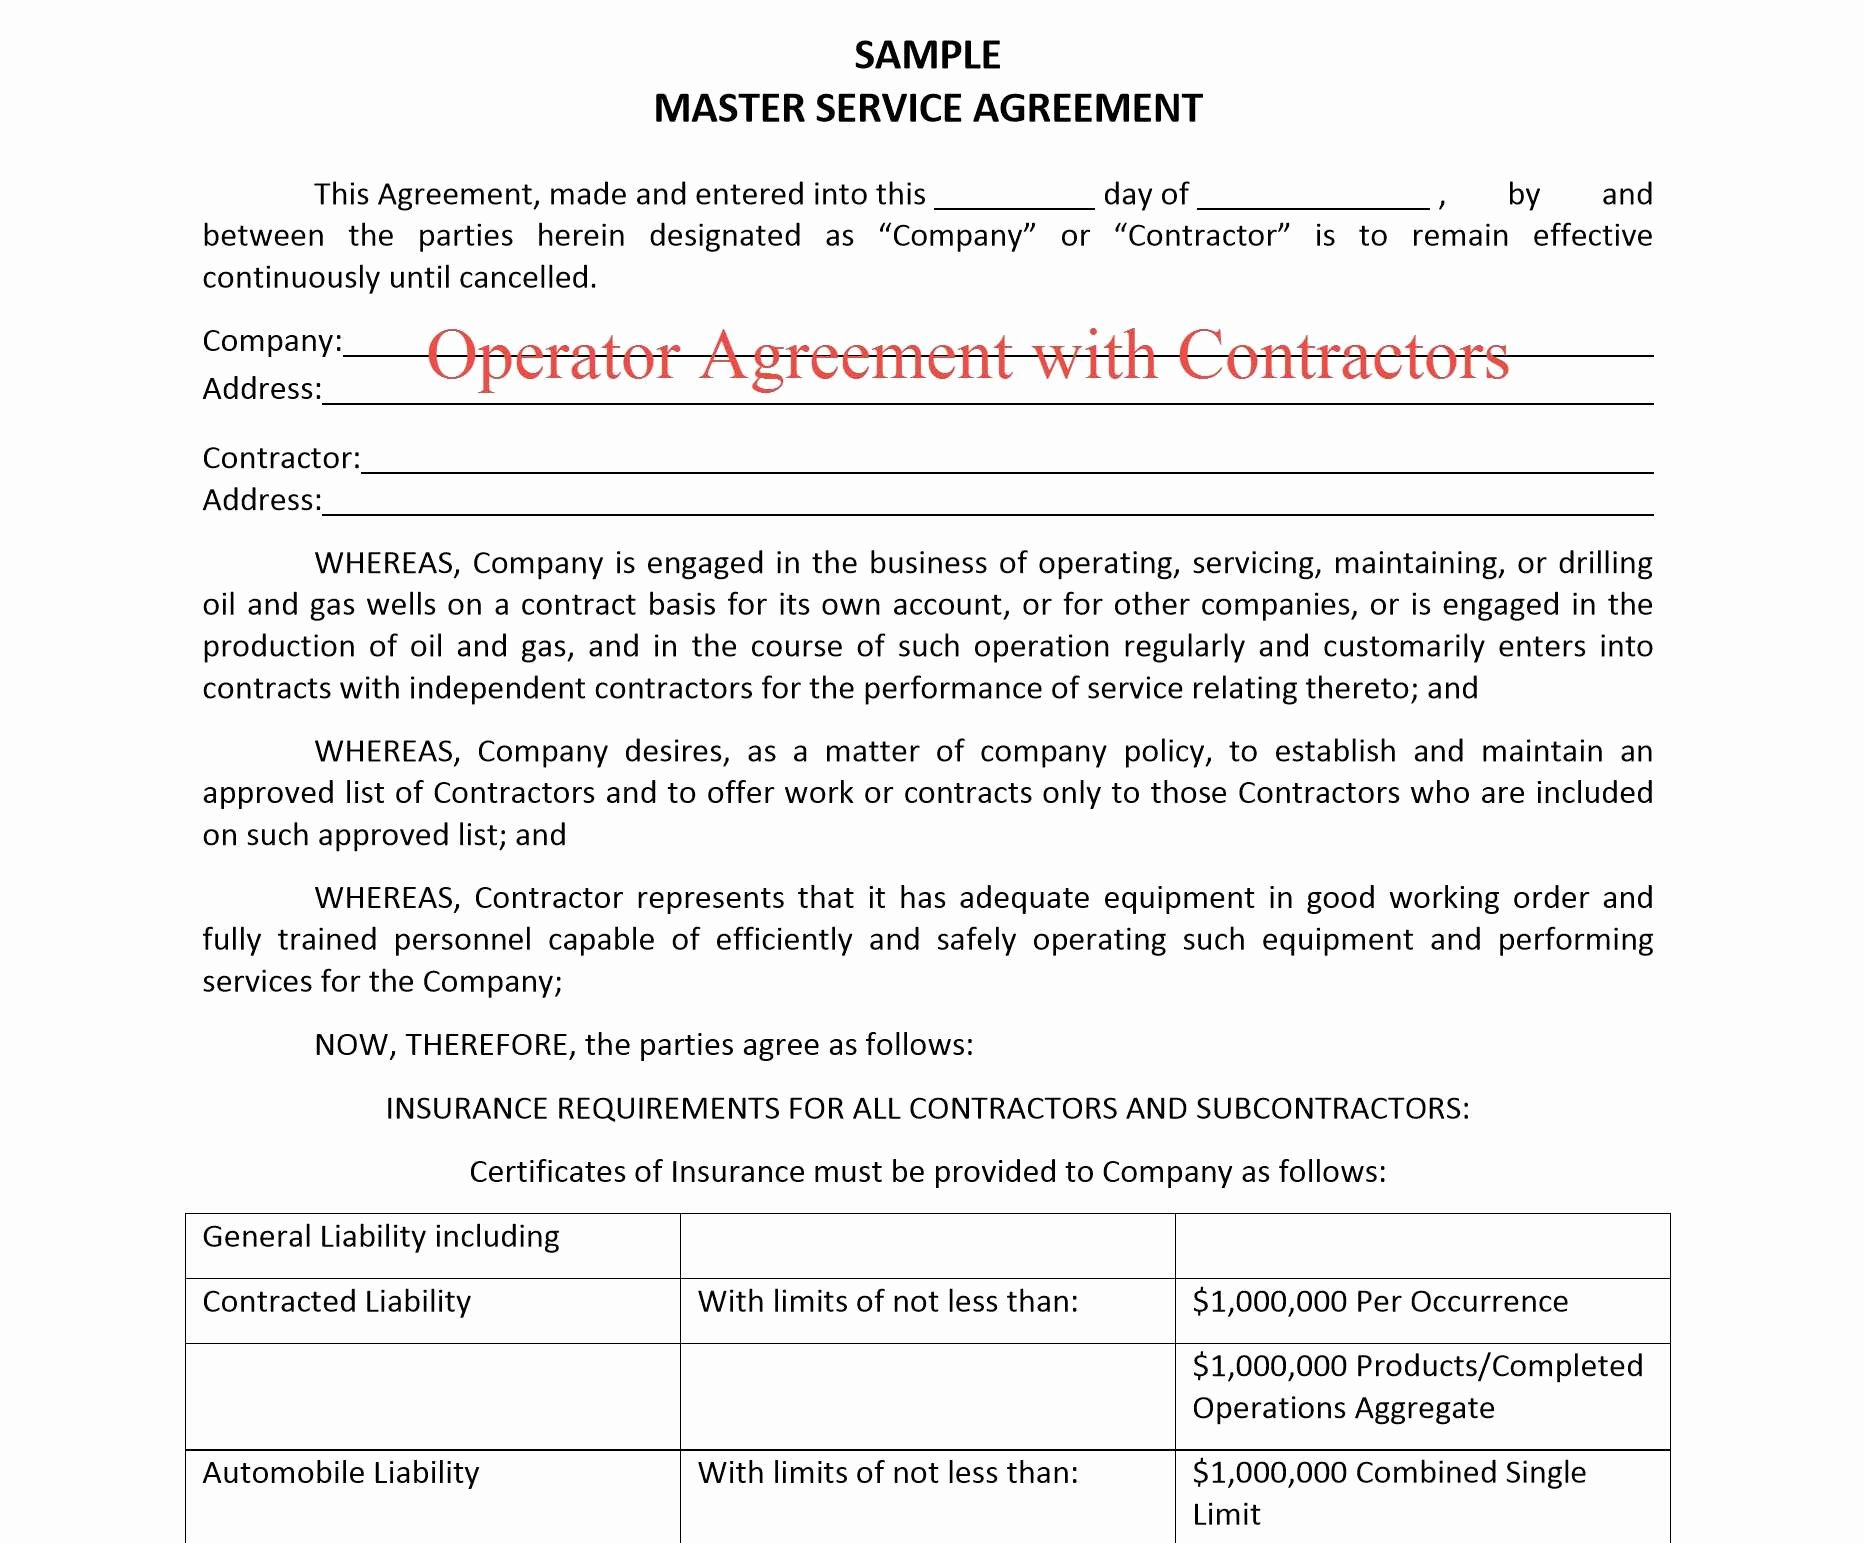 Master Service Agreement Template Lovely Sample Master Service Agreement afterelevenblog